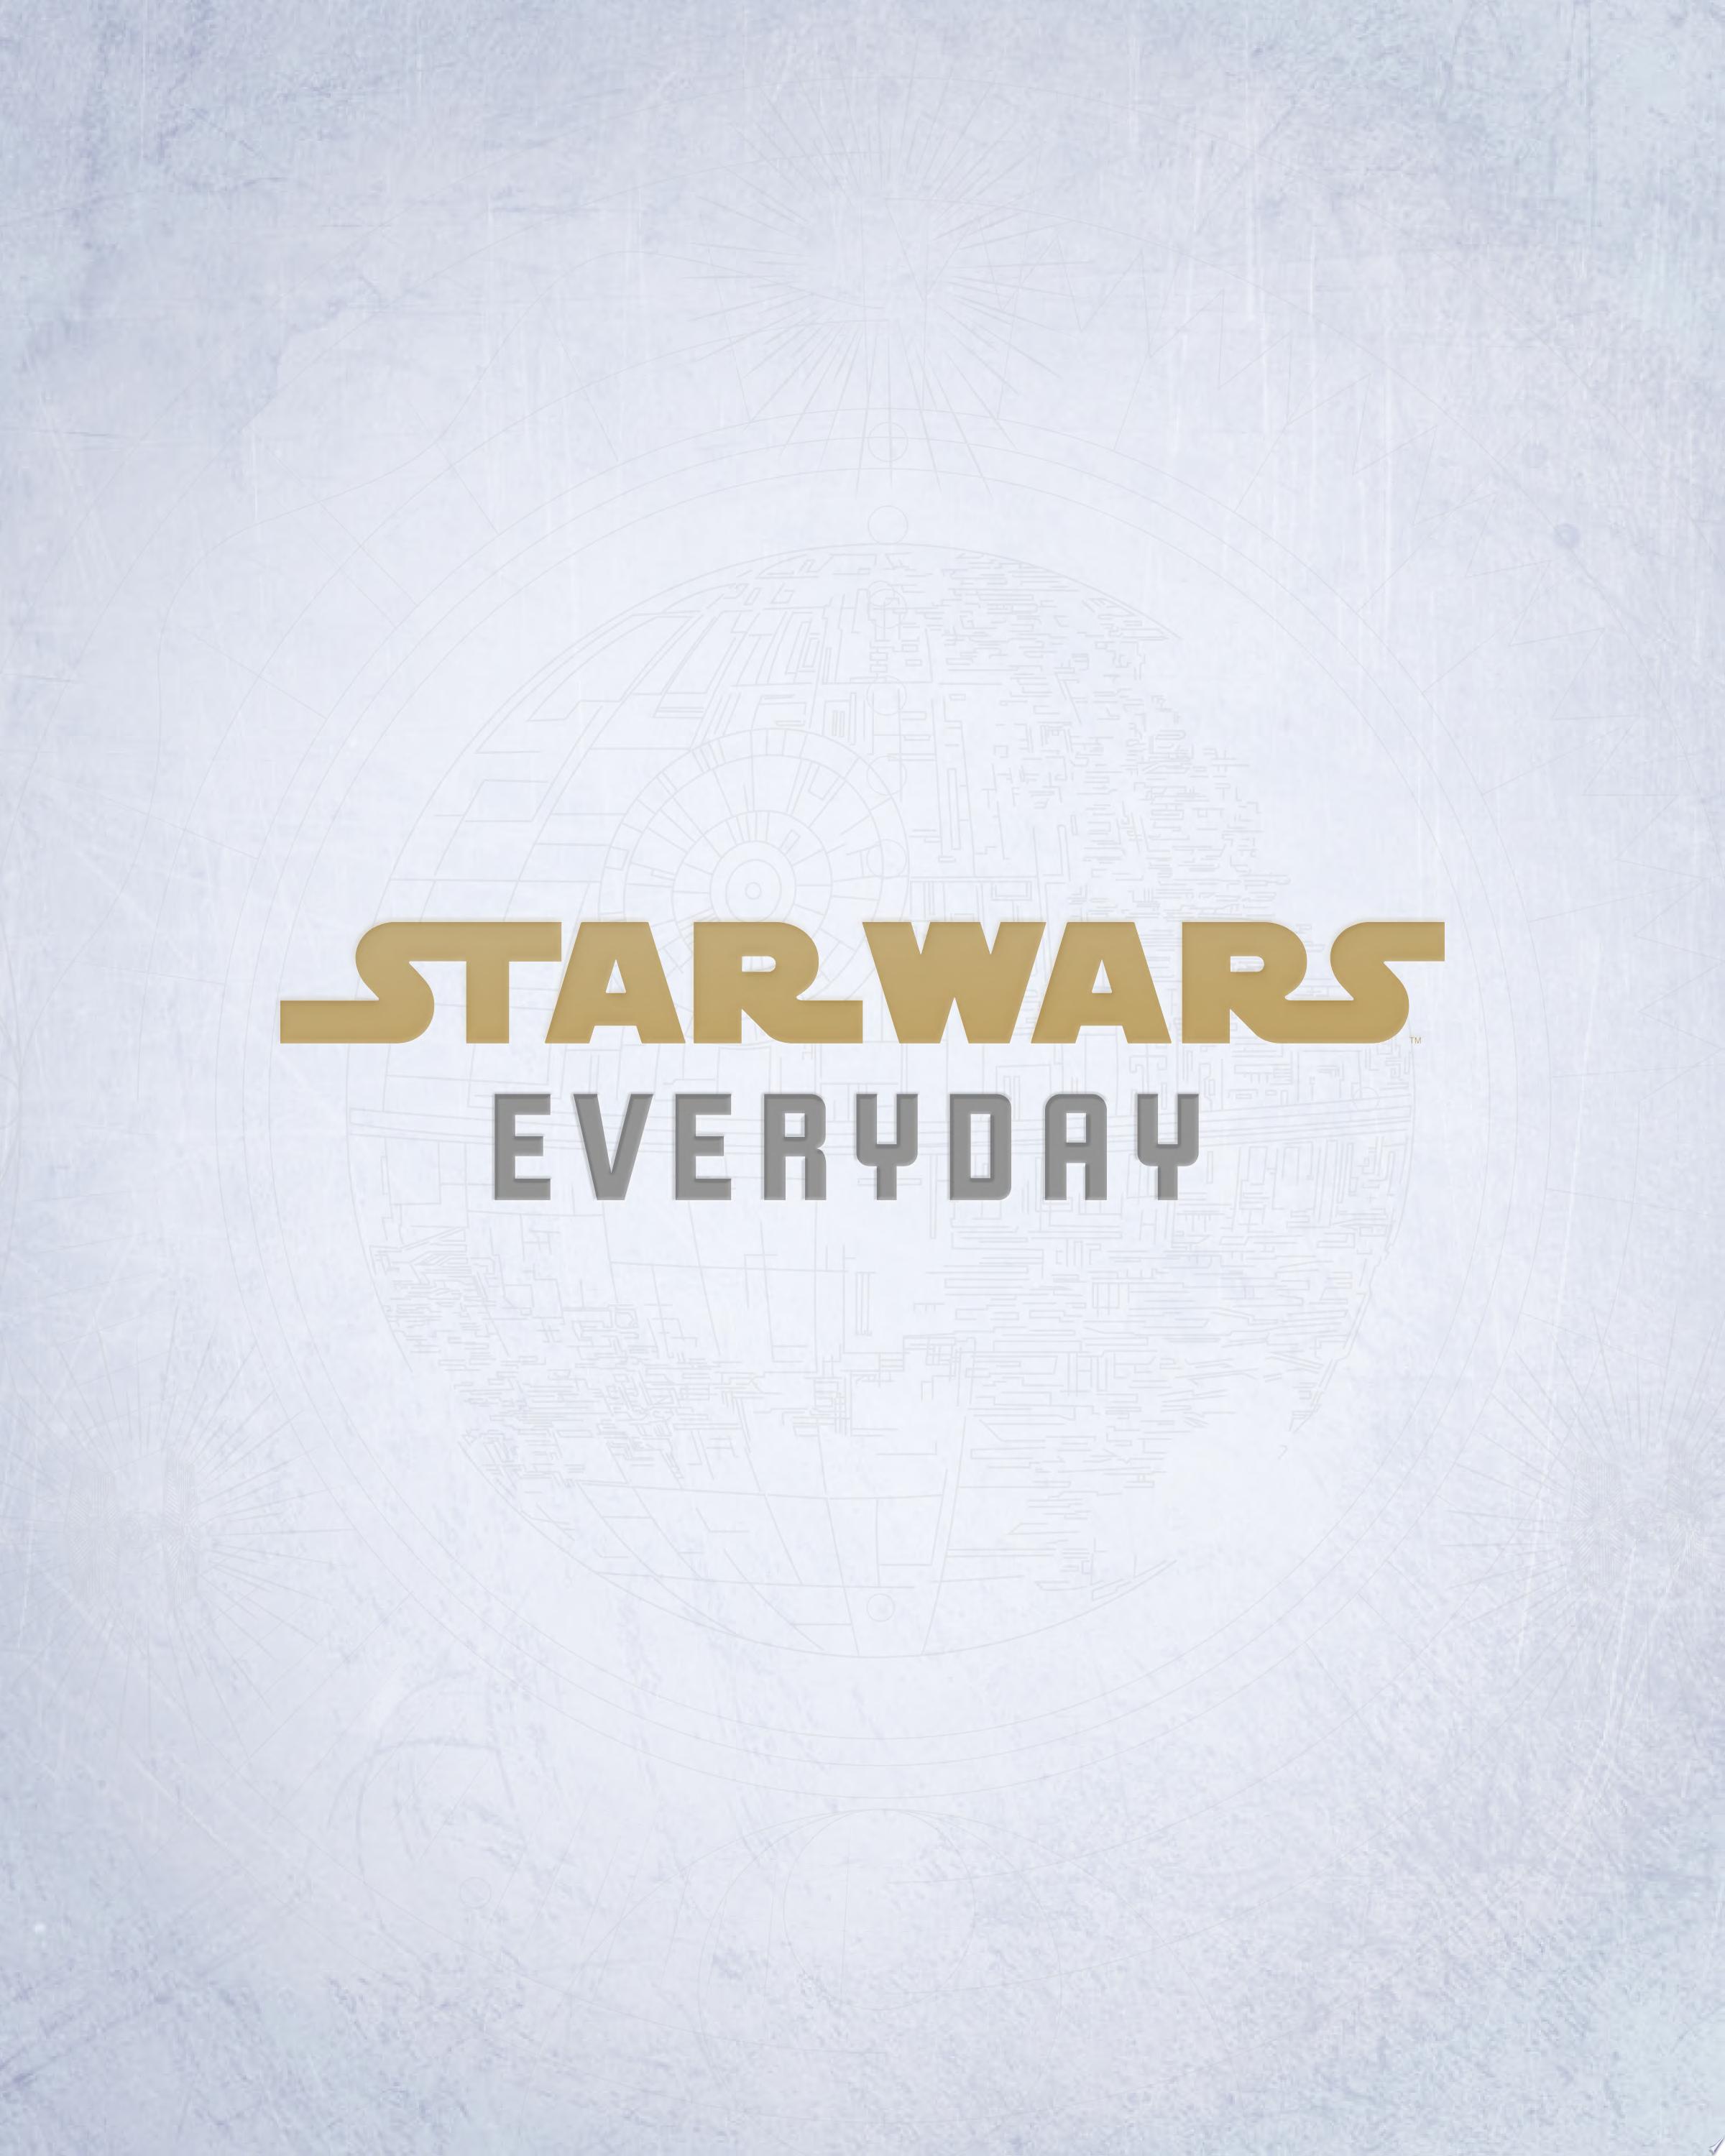 Image for "Star Wars Everyday"